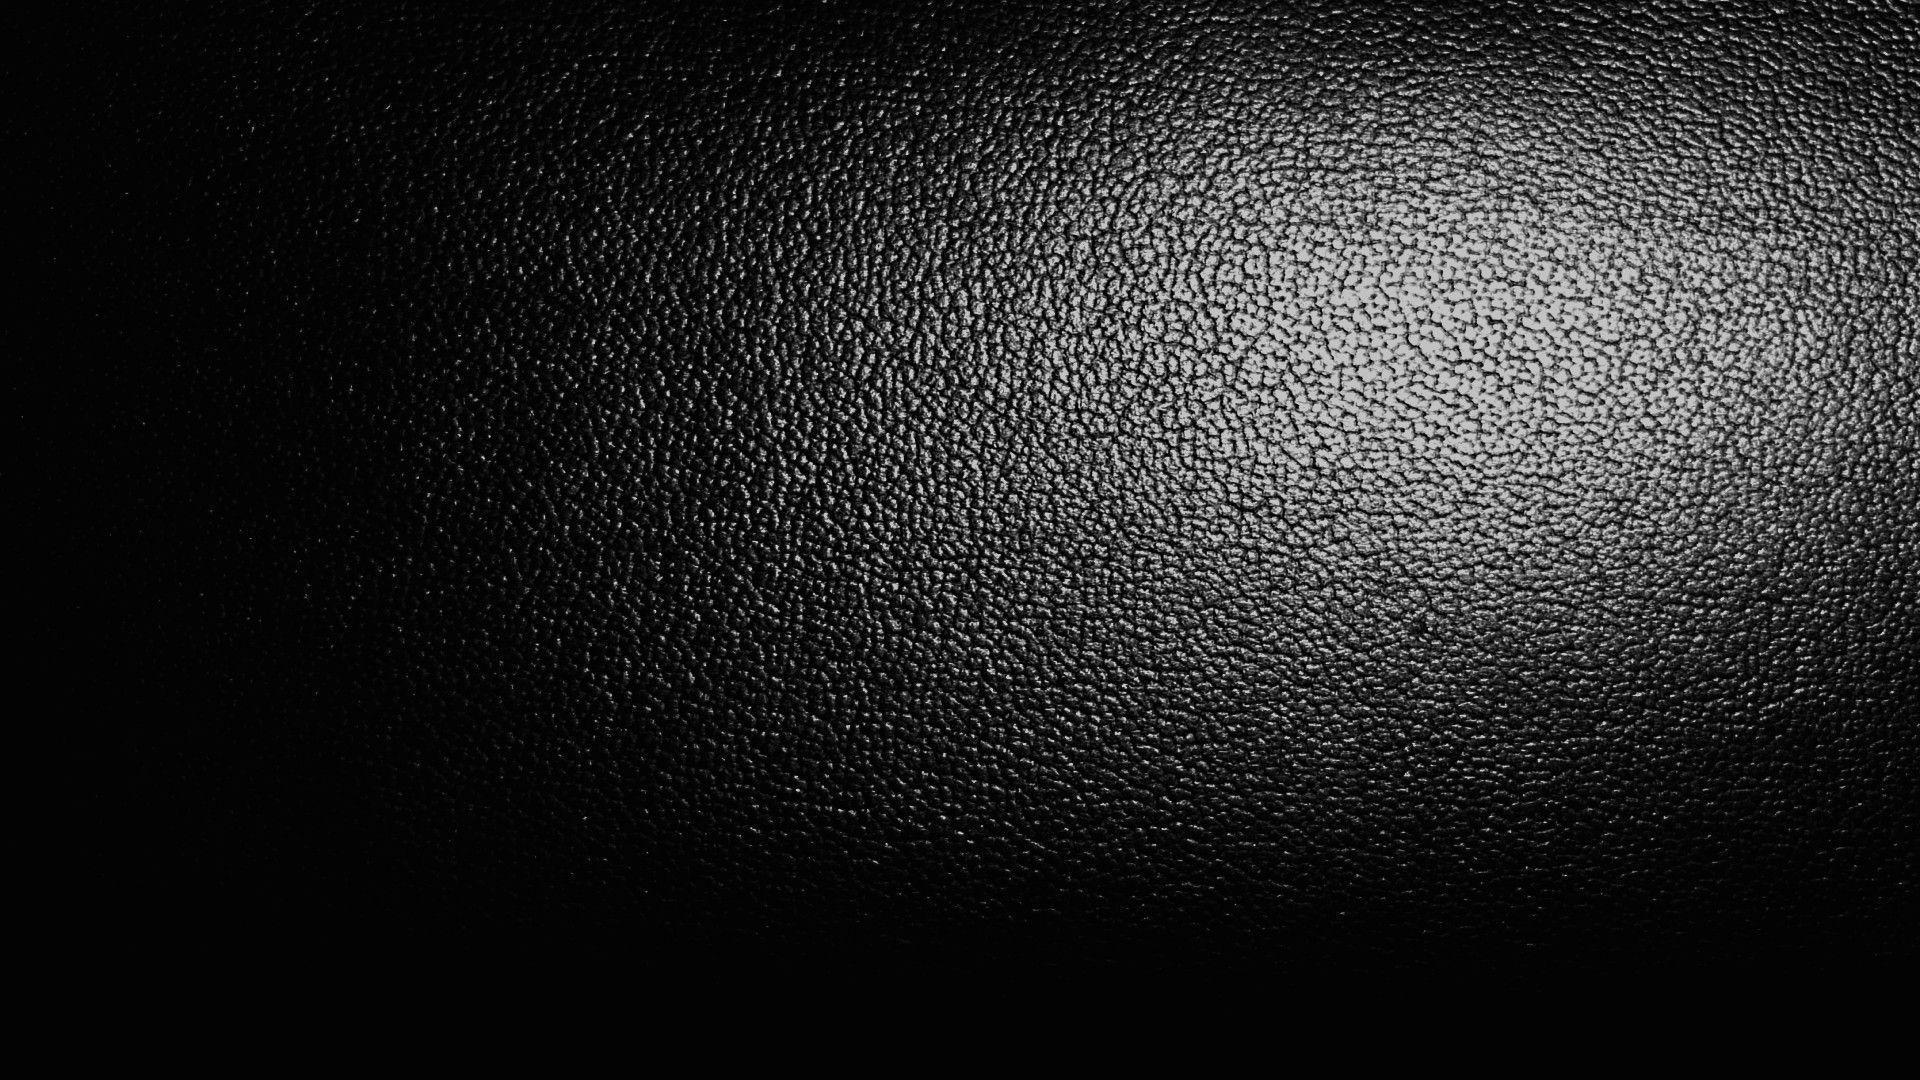 Download Leather Textures Wallpaper 1920x1080. Full HD Wallpaper